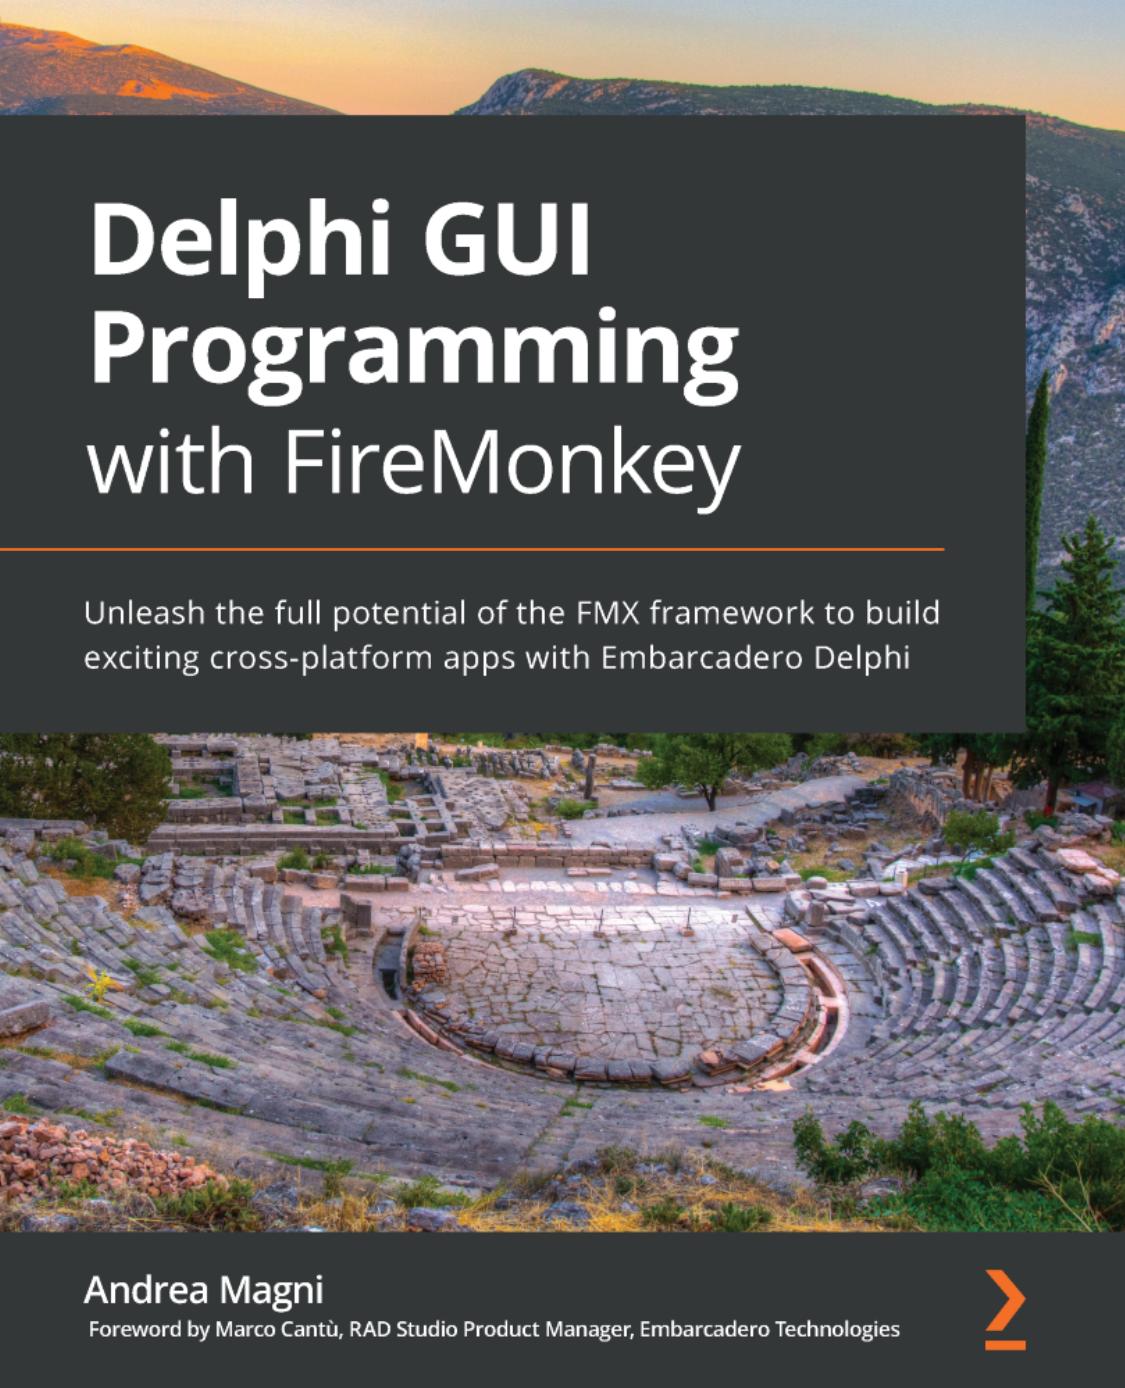 Delphi GUI Programming with FireMonkey by Andrea Magni